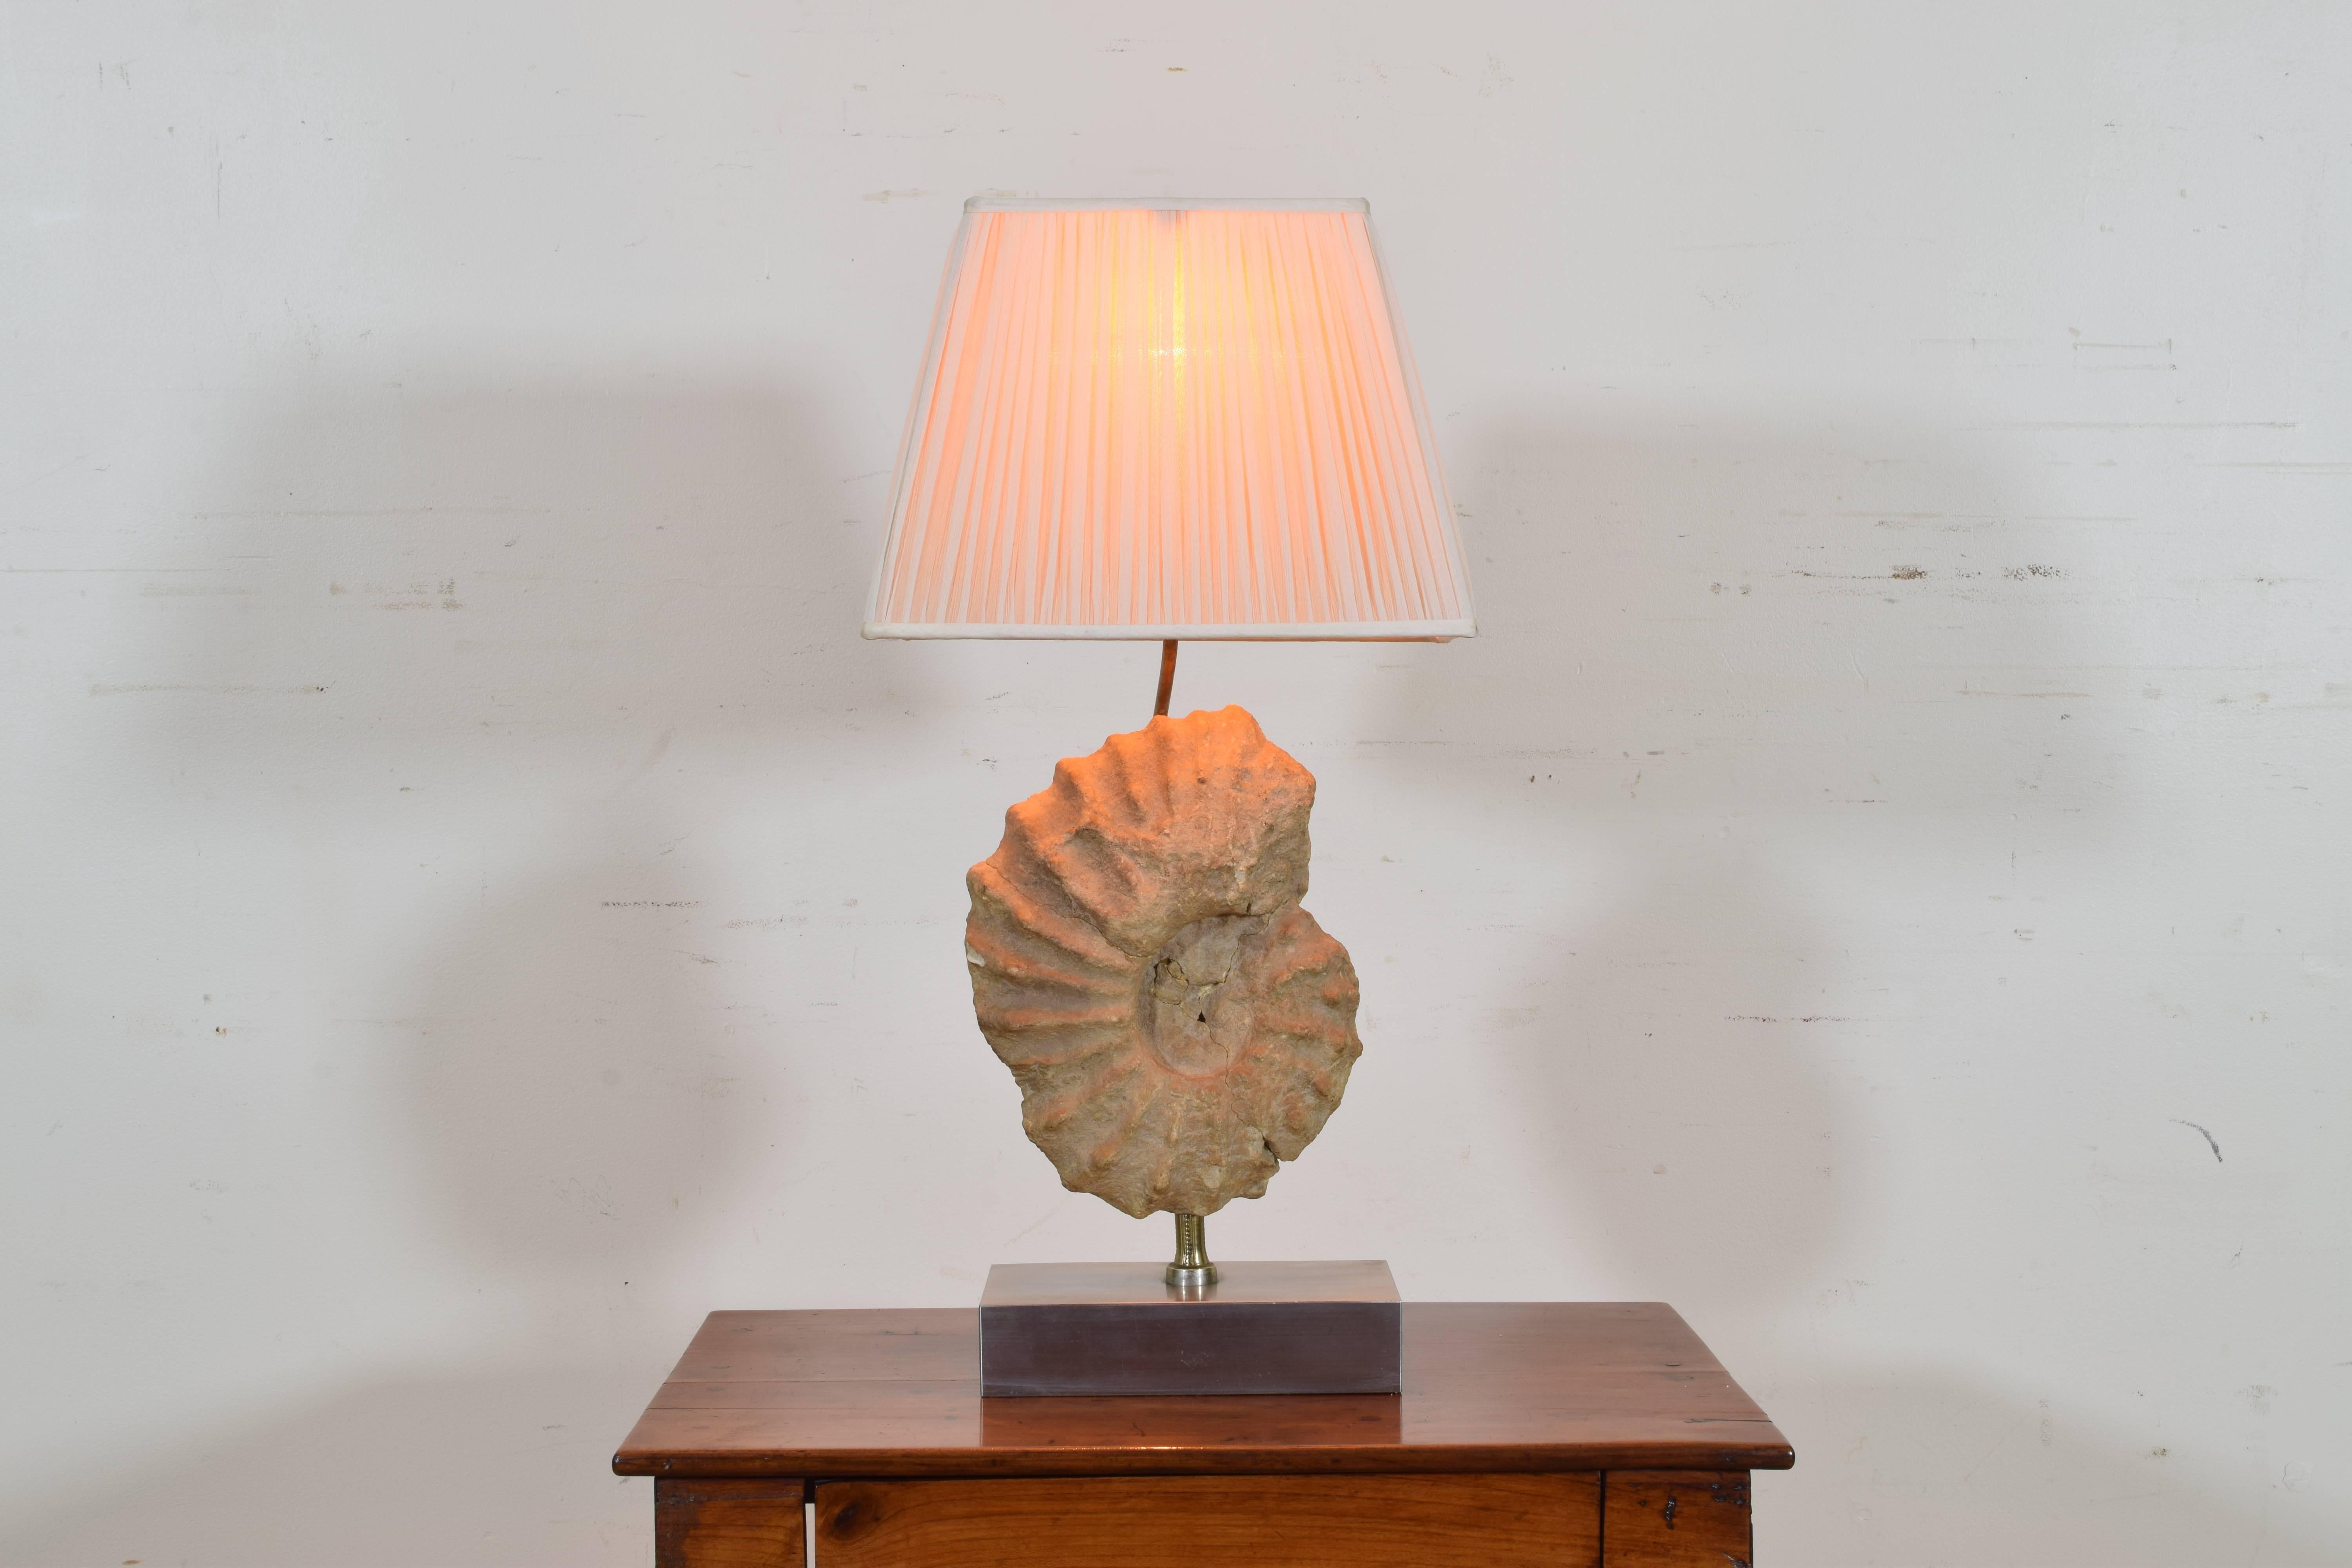 Probably mounted as a lamp in the mid-20th century, the ammonite having gone extinct some 65 million years ago.